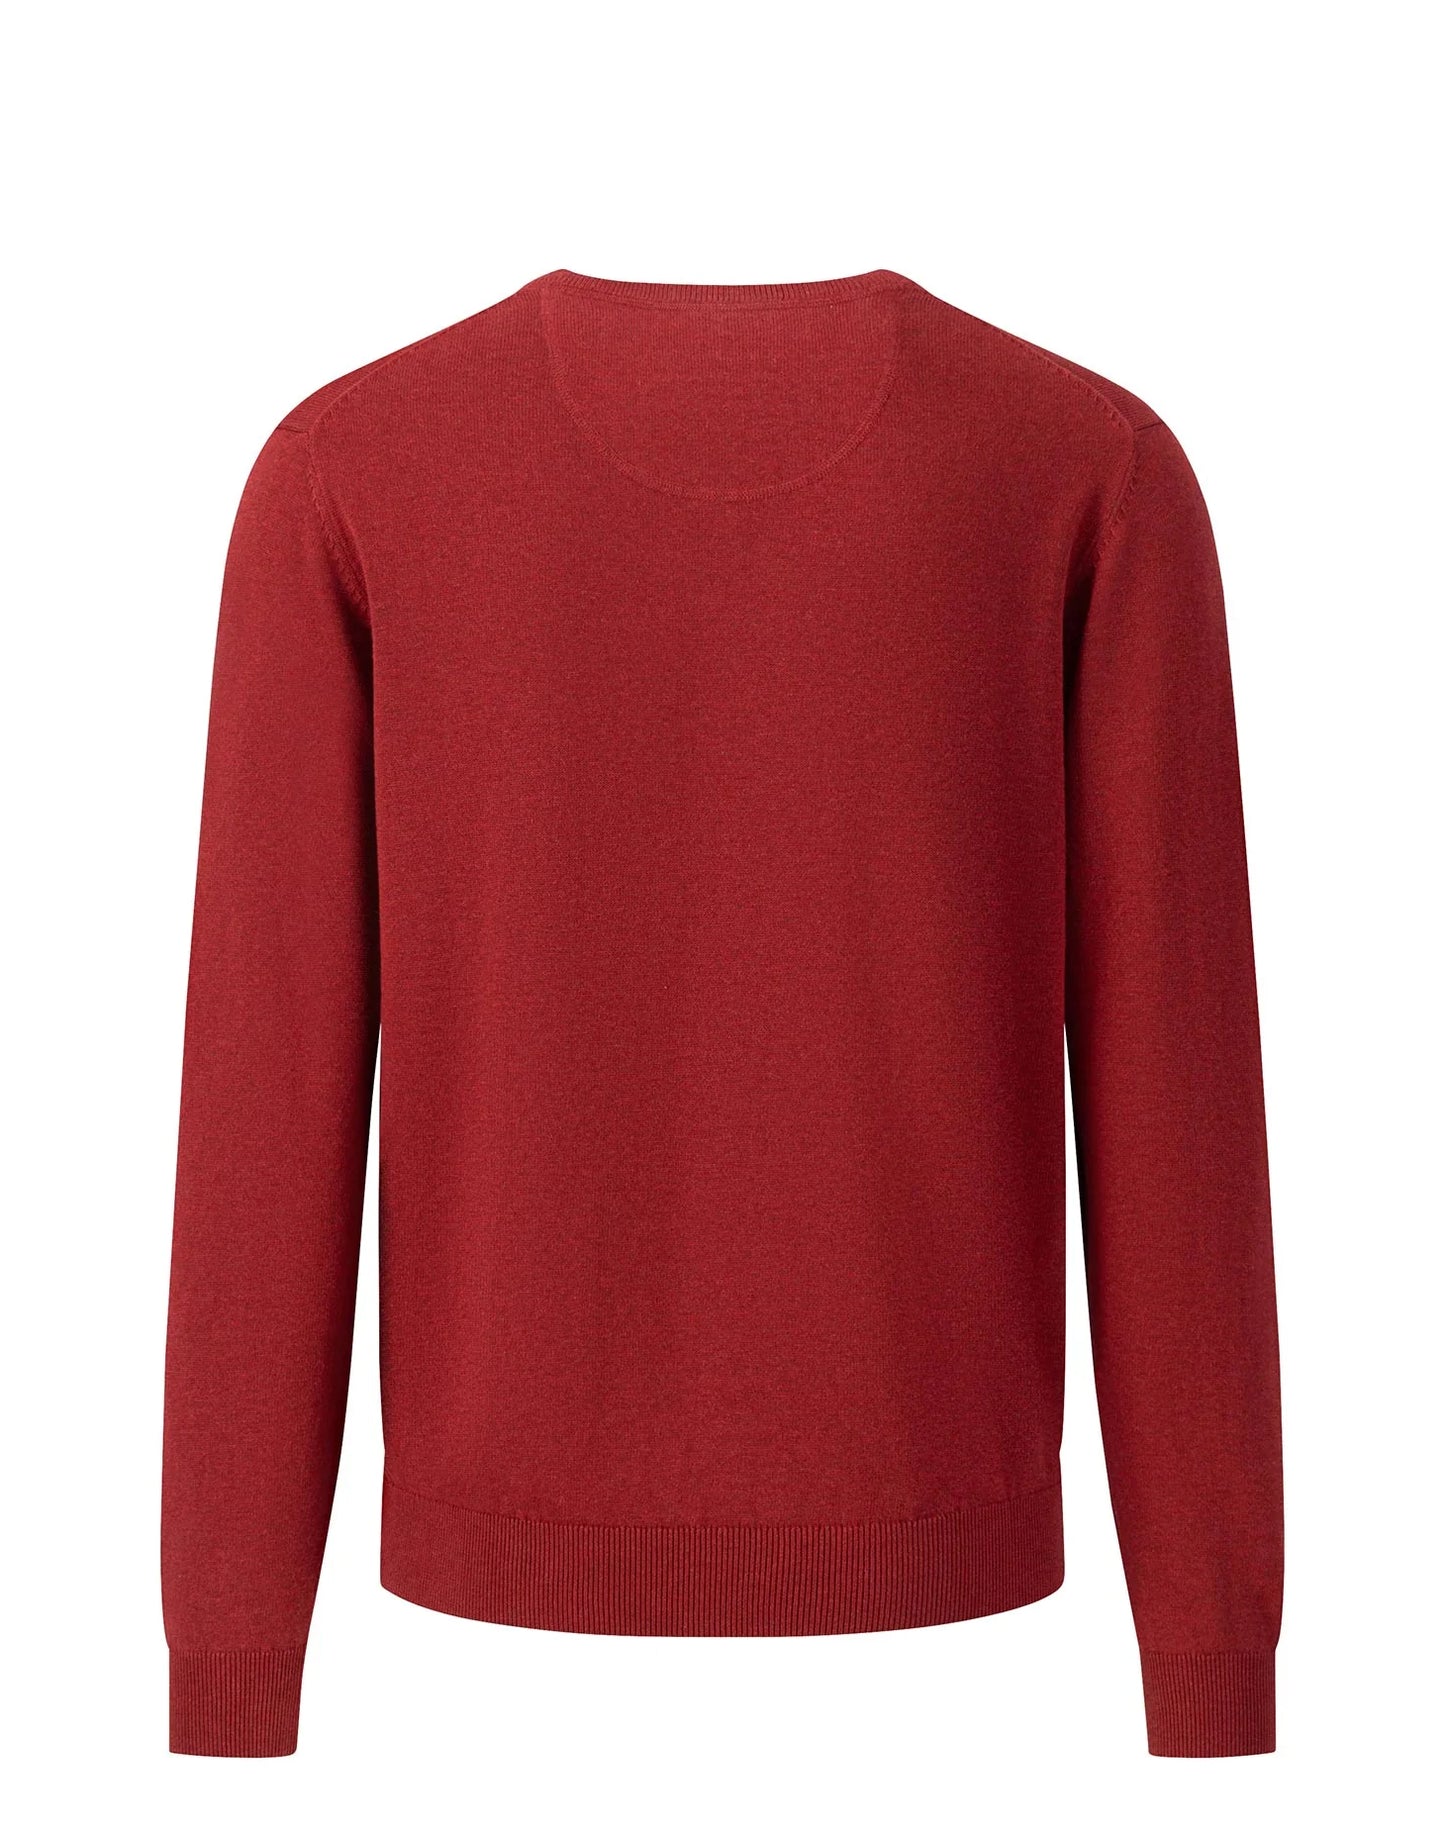 SOFT COTTON SWEATER WITH A V-NECK - Scarlet